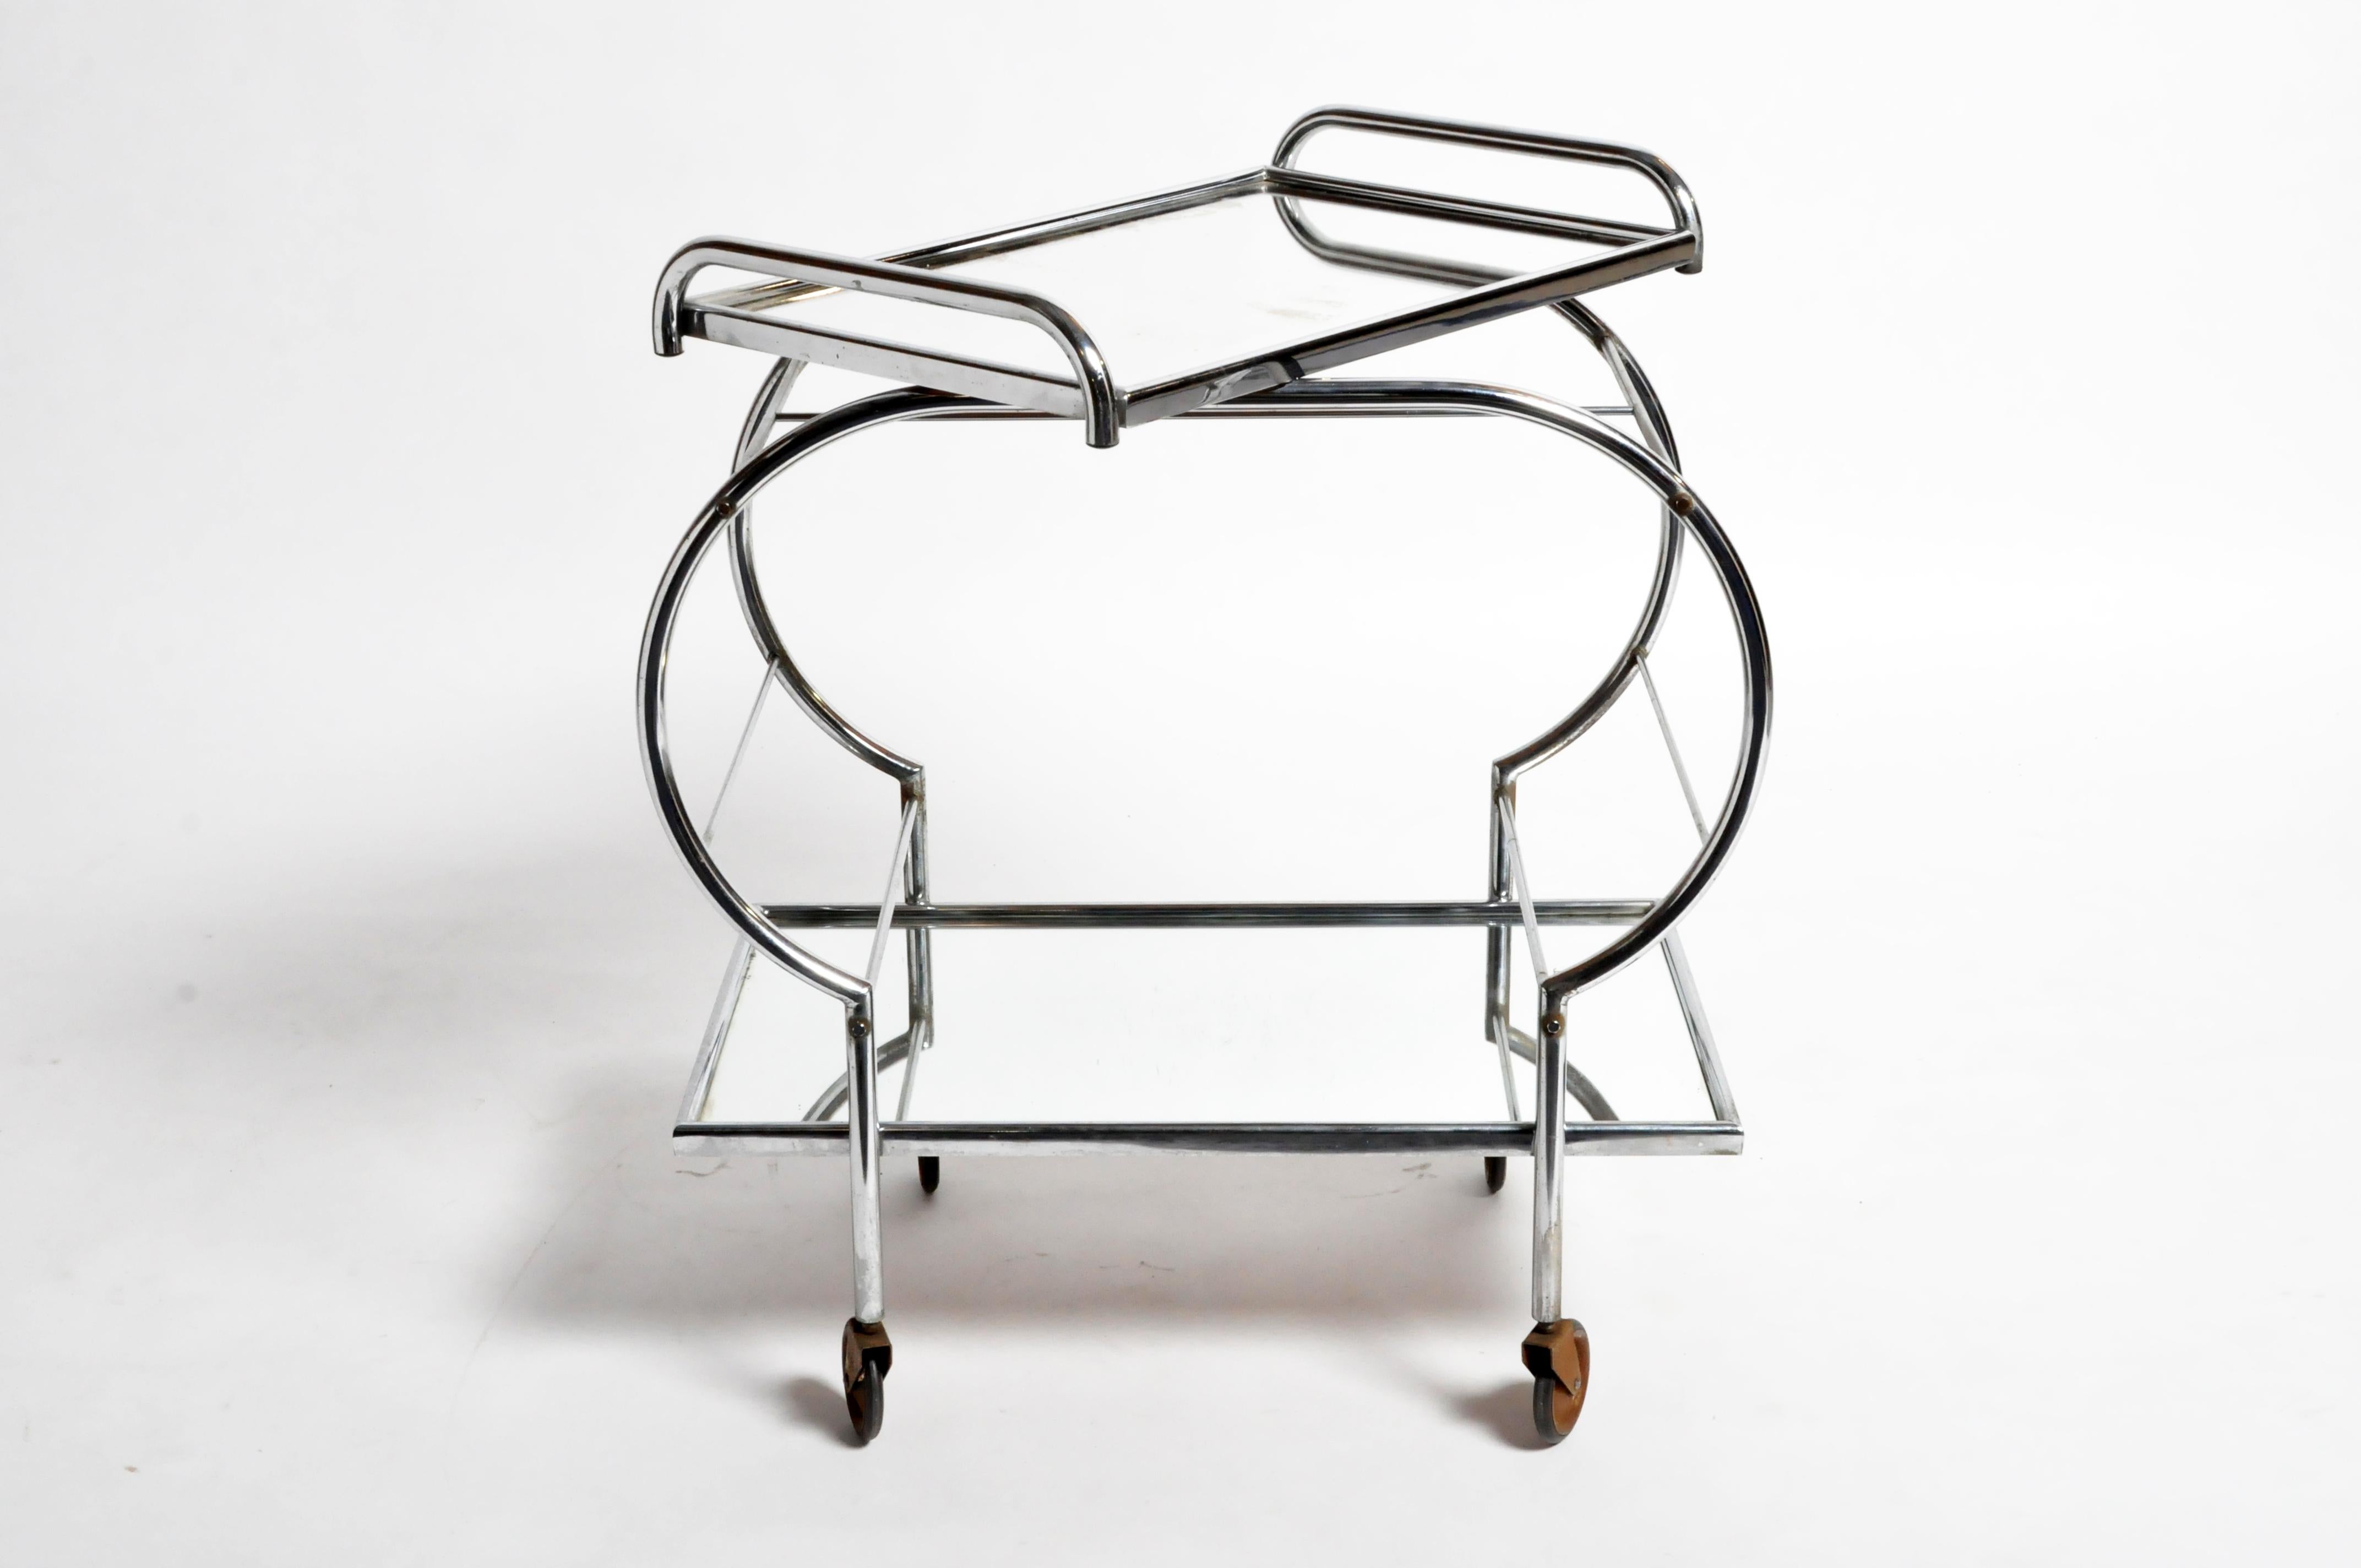 This elegant serving cart is from Hungary and was made from metal, circa 1950. The cart features a removable top tray that functions as a serving tray. Wear consistent with age and use.